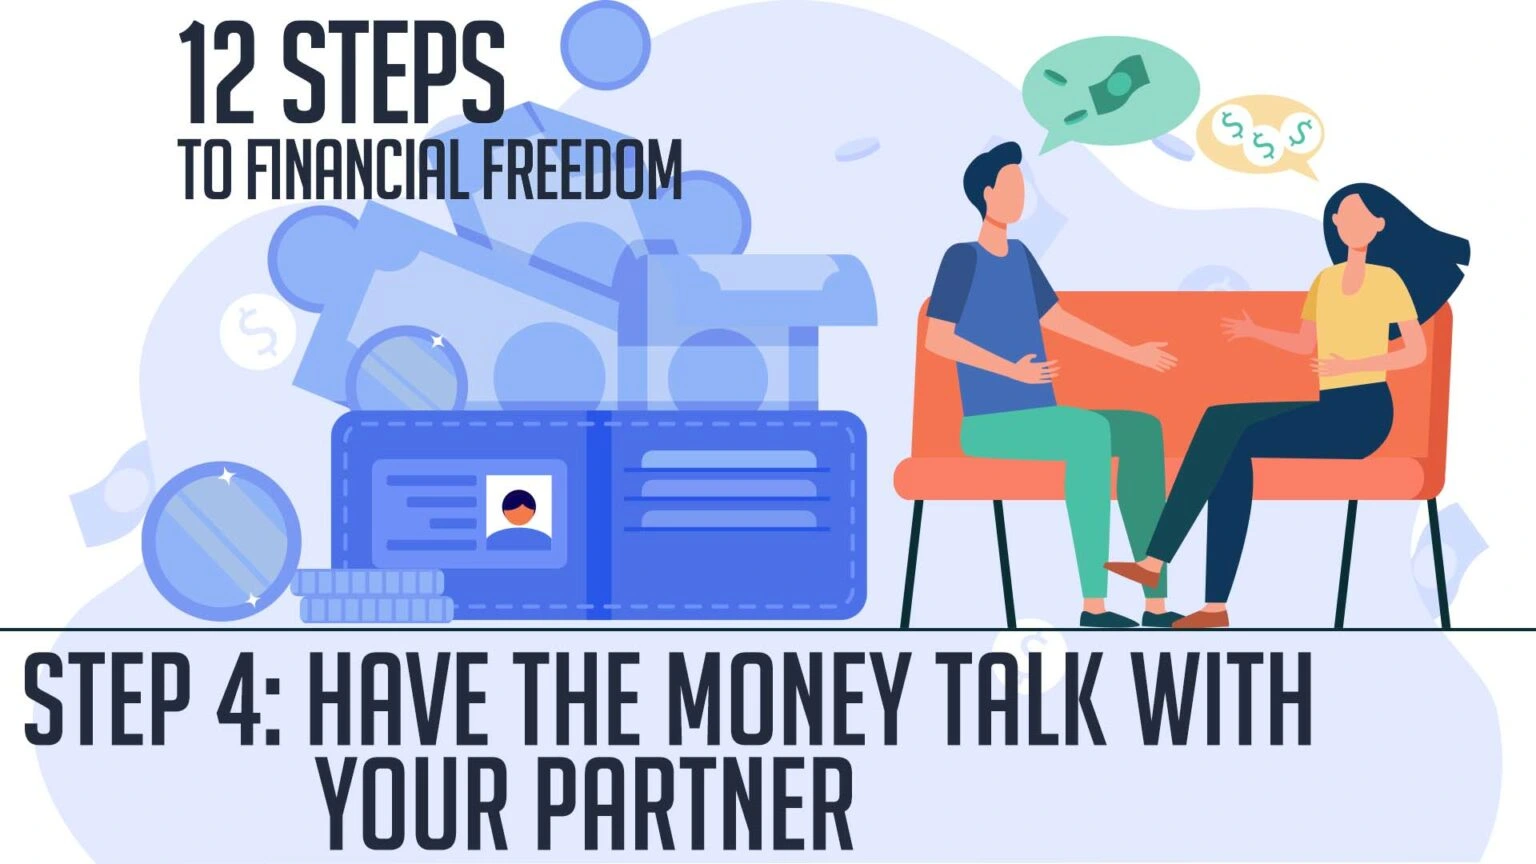 12 Steps to Financial Freedom. -4 Have the Money Talk With Your Partner